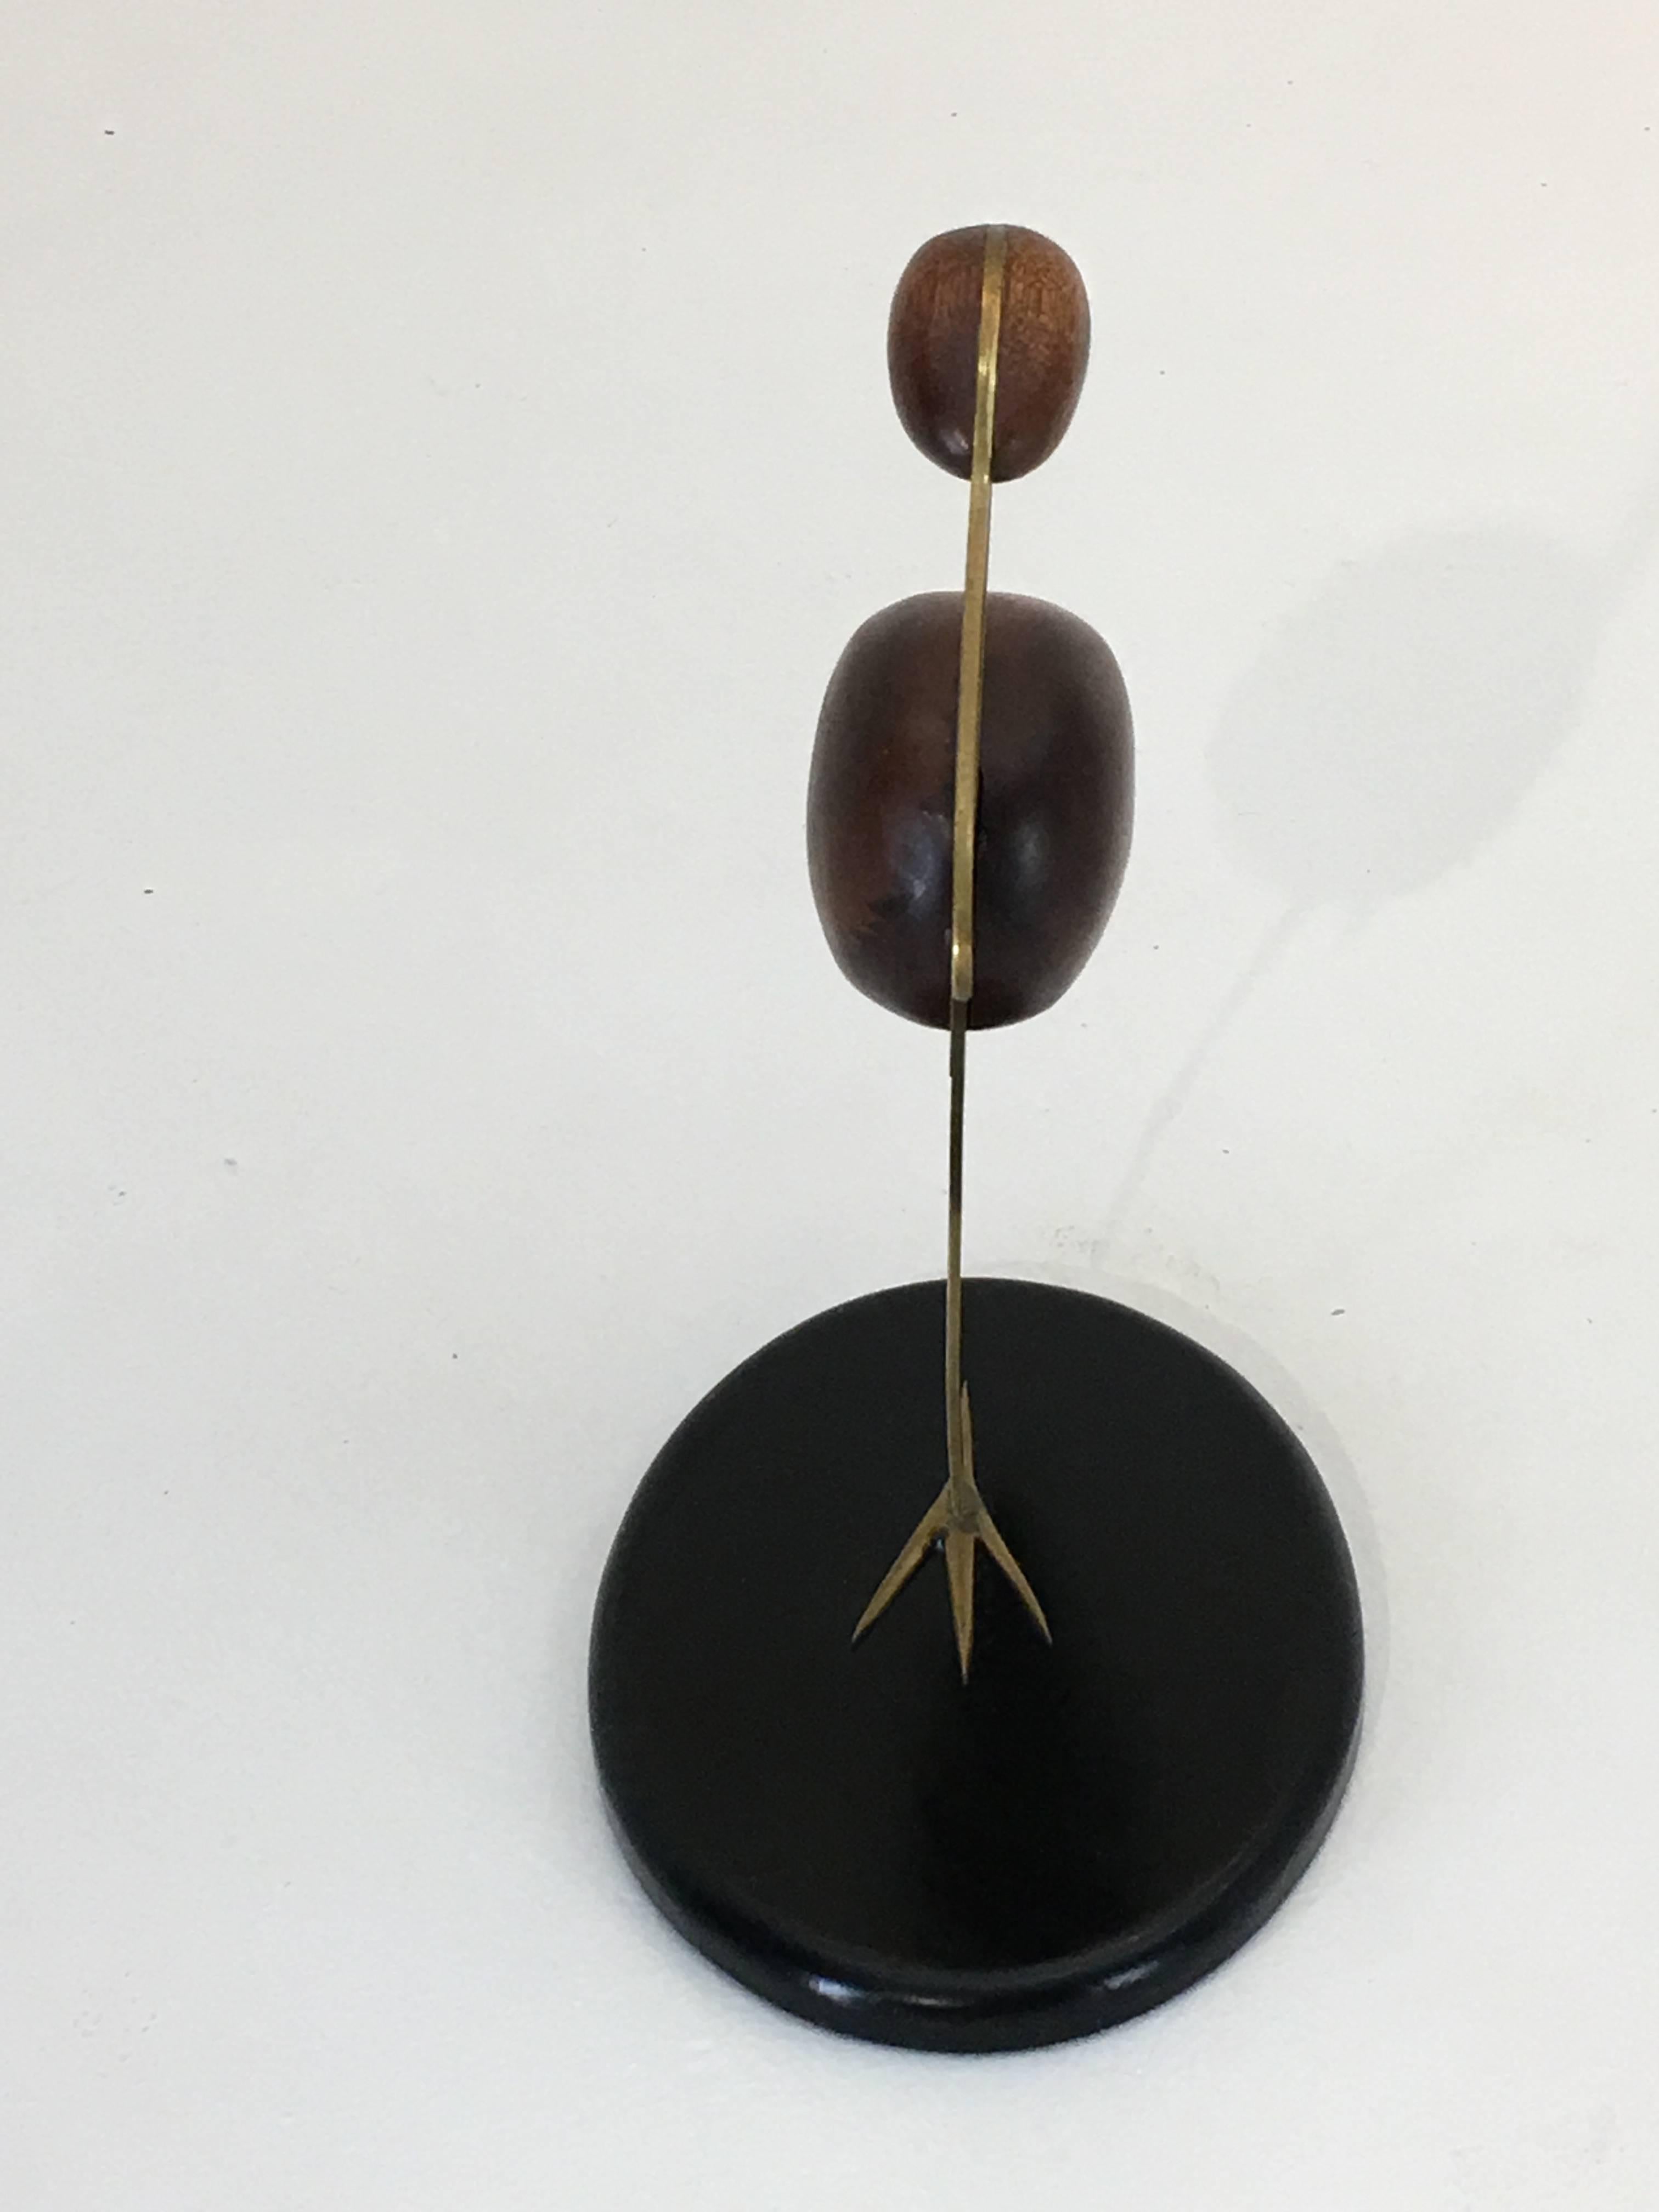 Crane brass and walnut table top sculpture by Bill Scott In Excellent Condition For Sale In South Charleston, WV